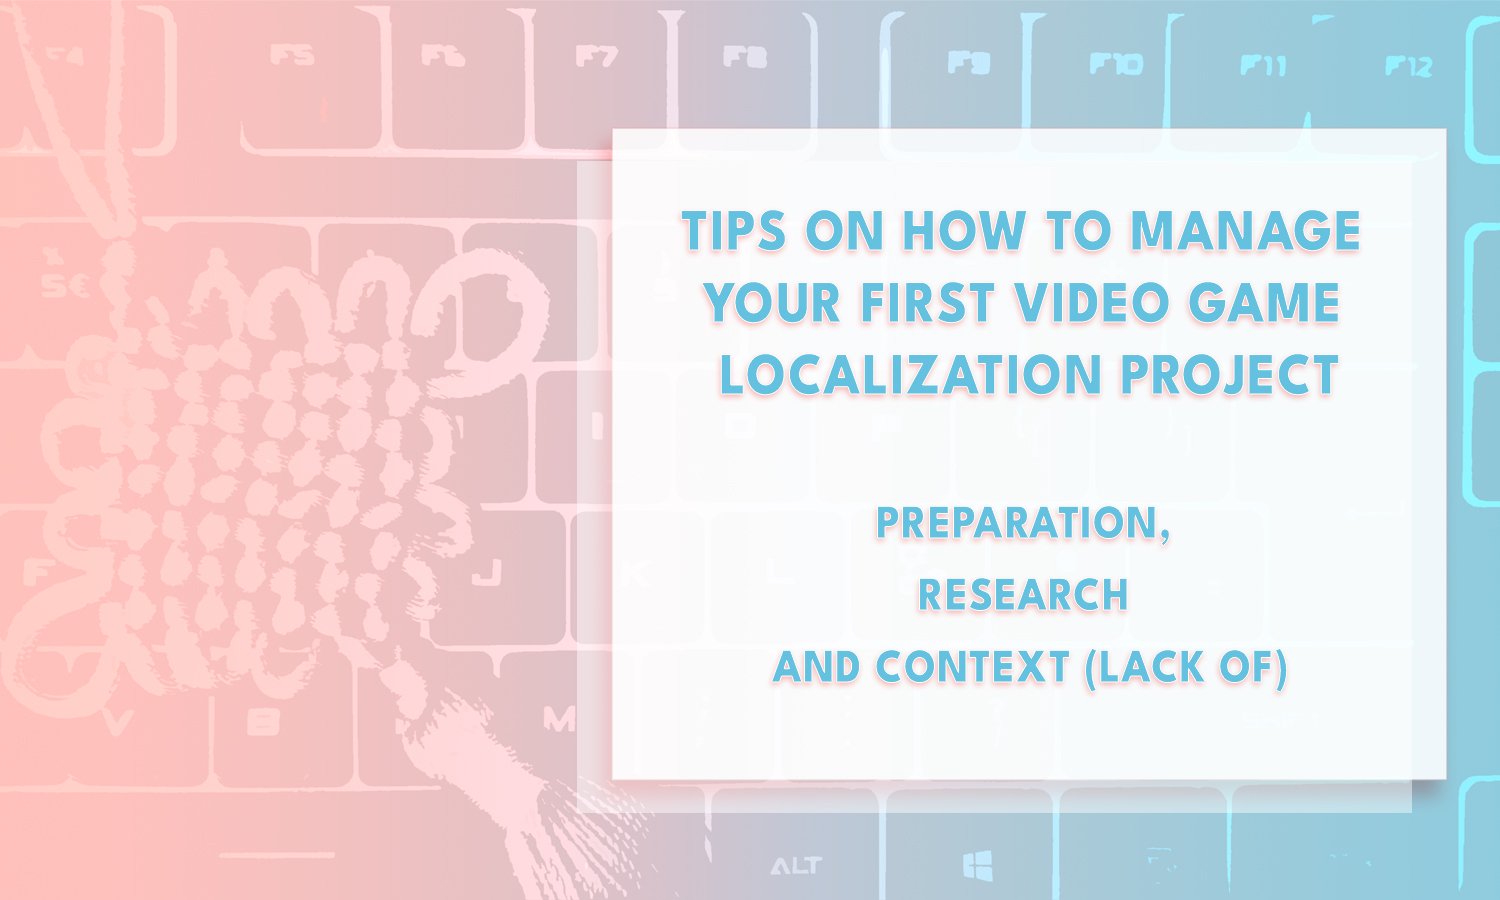 Tips on how to manage your first video game localization project